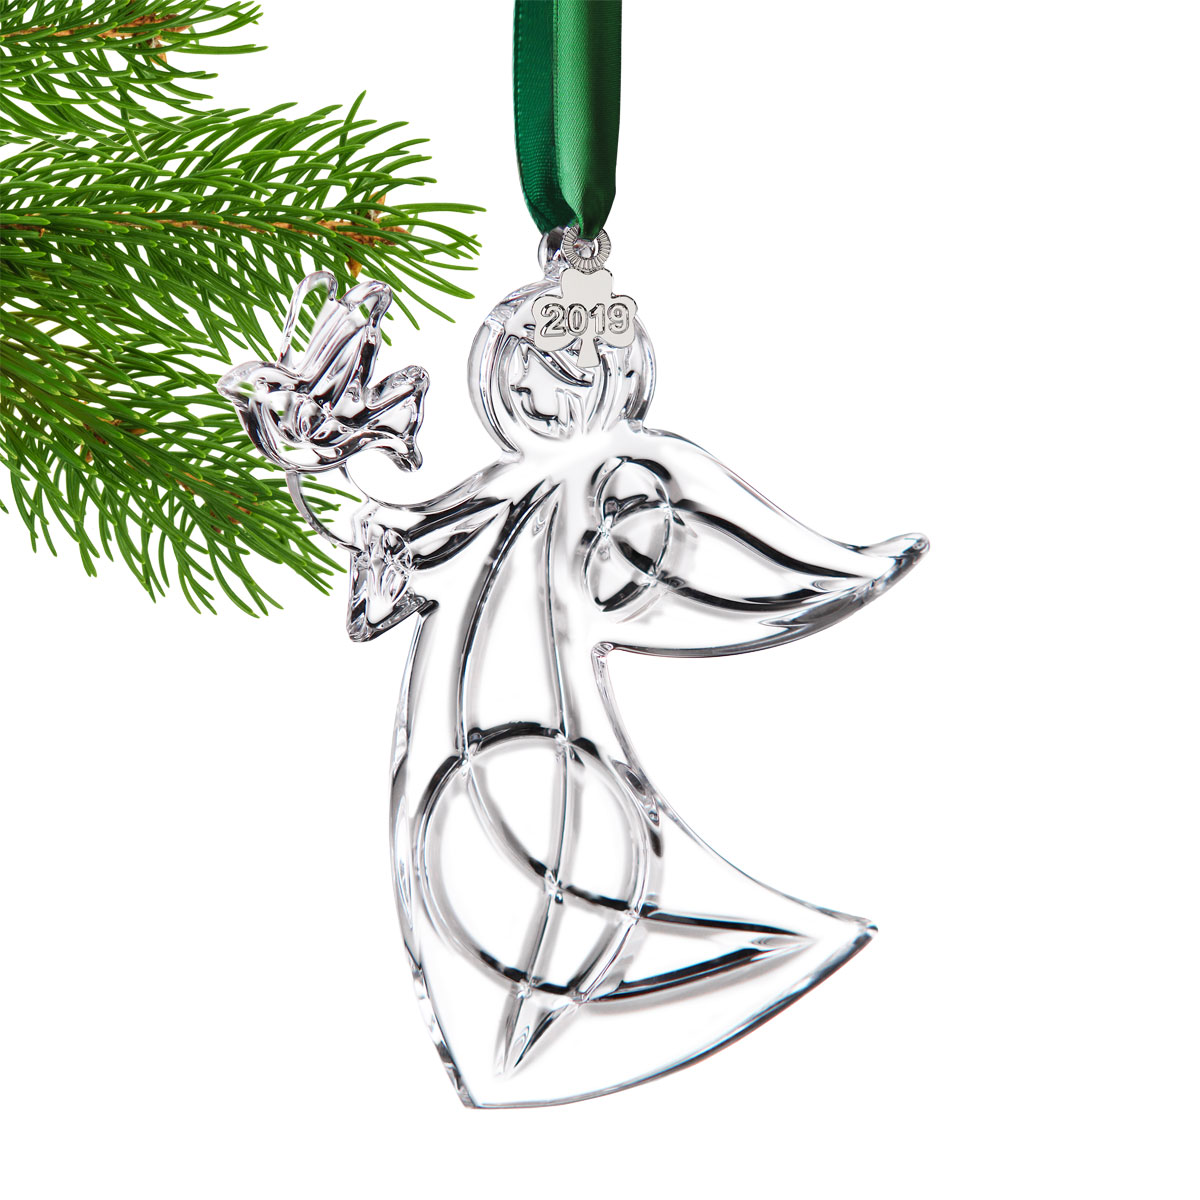 Cashs Ireland, 2019 Angel with Peace Dove Ornament, Annual Edition